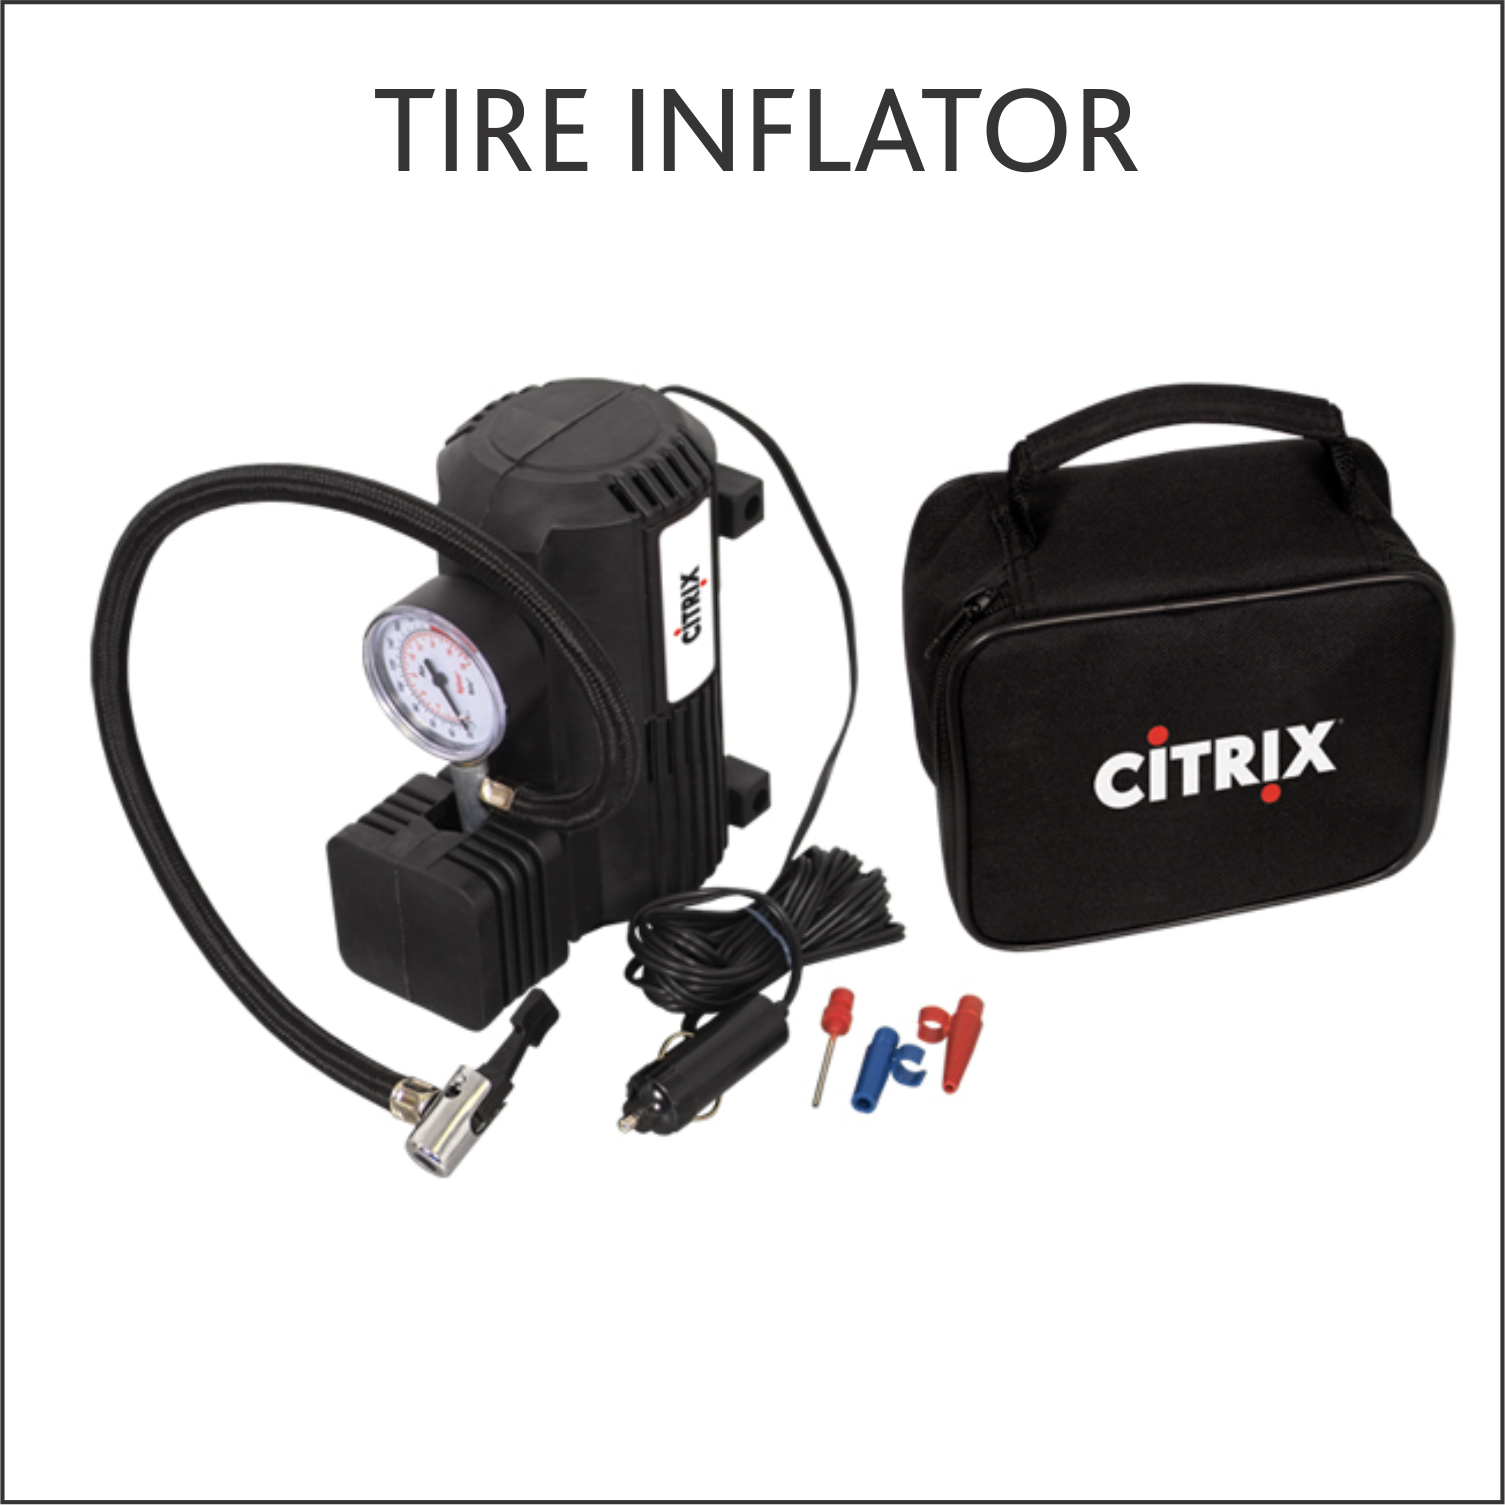 TIRE INFLATOR.png